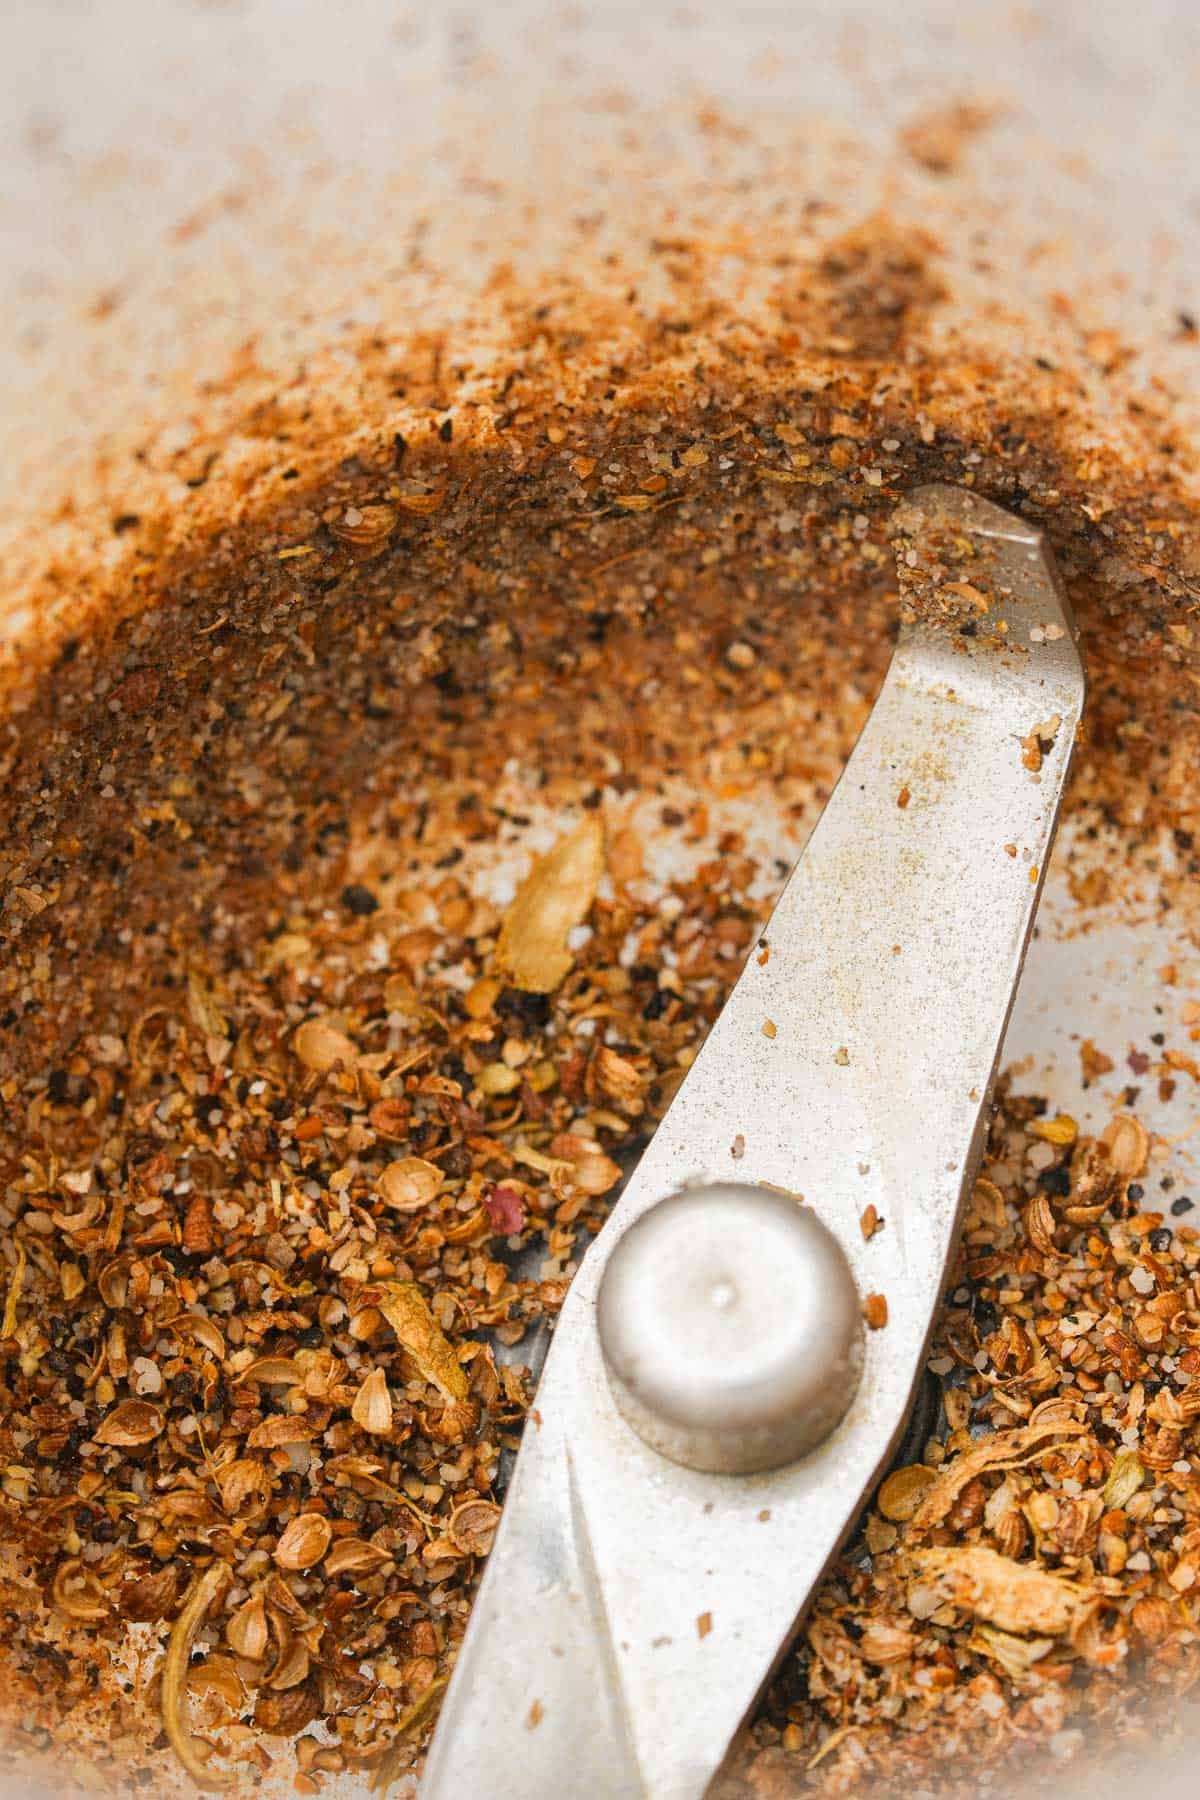 A blender is being used to grind spices.